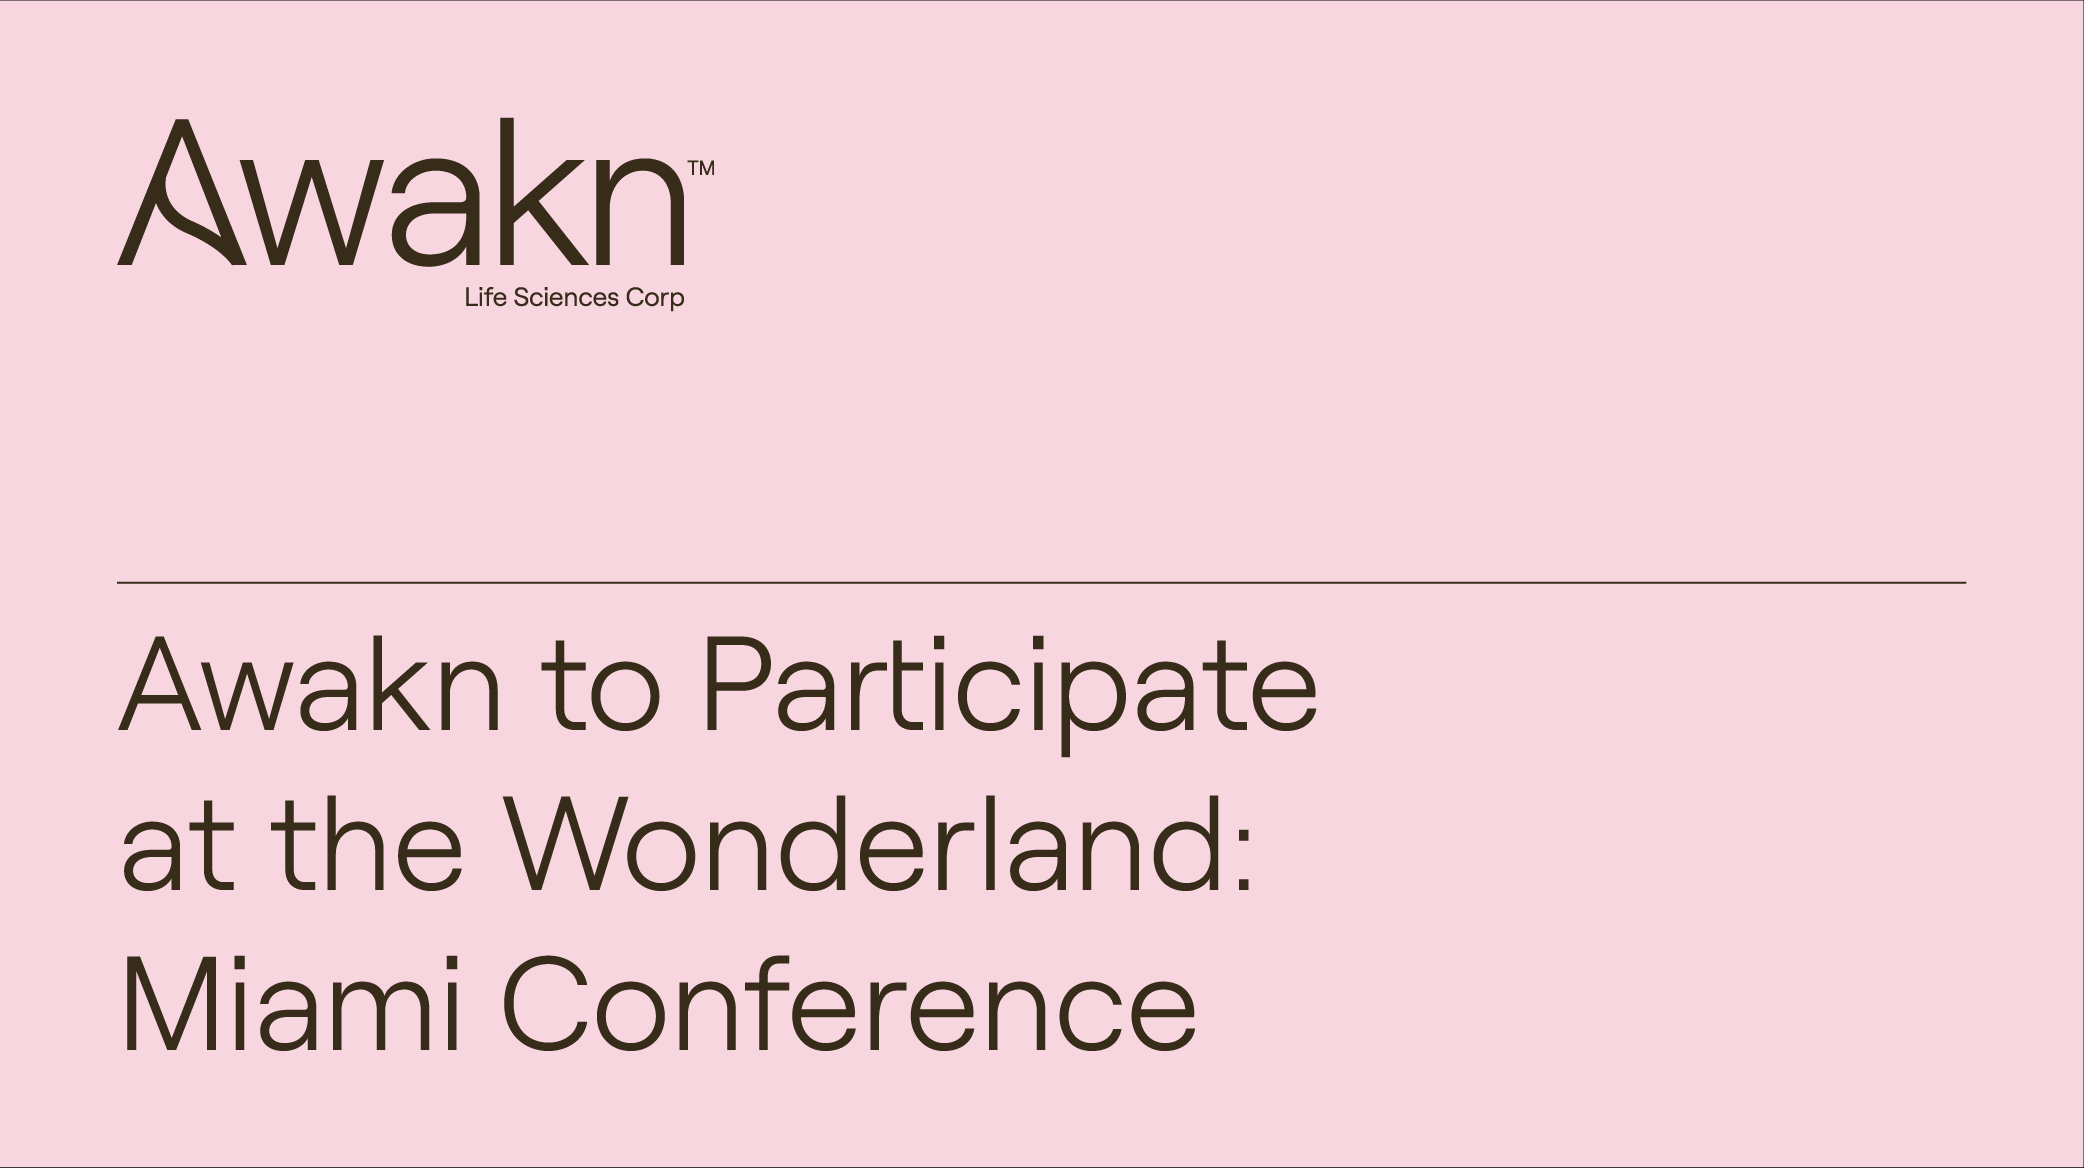 Awakn Life Sciences to Participate at the Wonderland: Miami Conference in November 2021